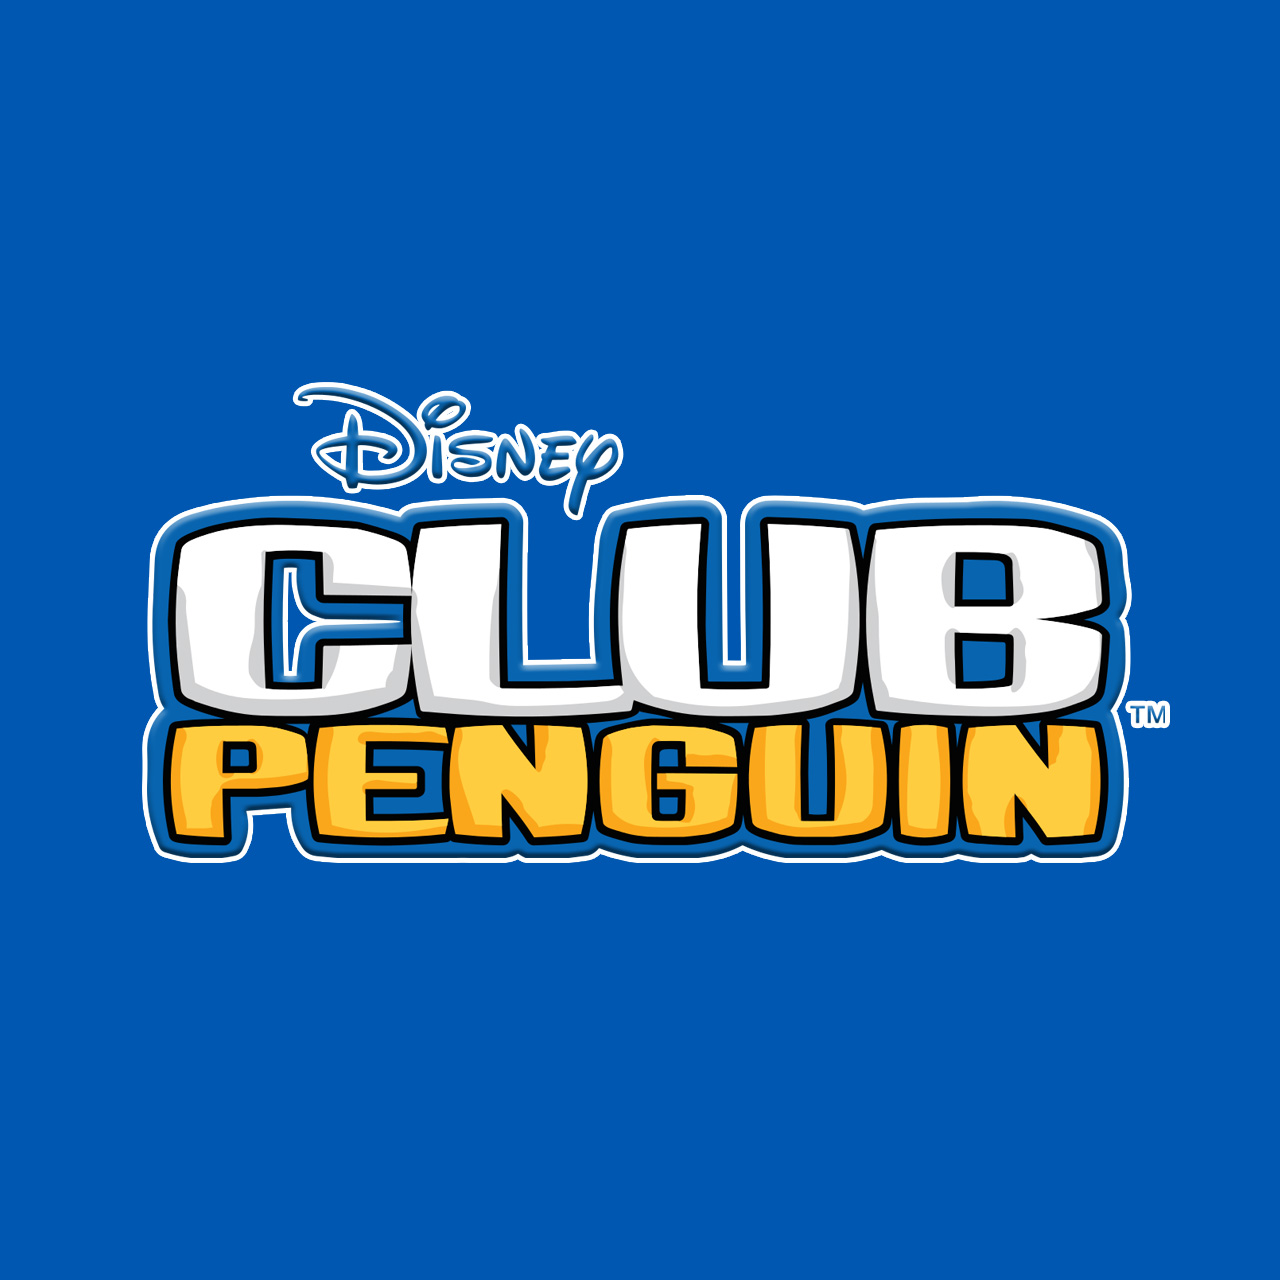 Club penguin will replace a new mobile app by March